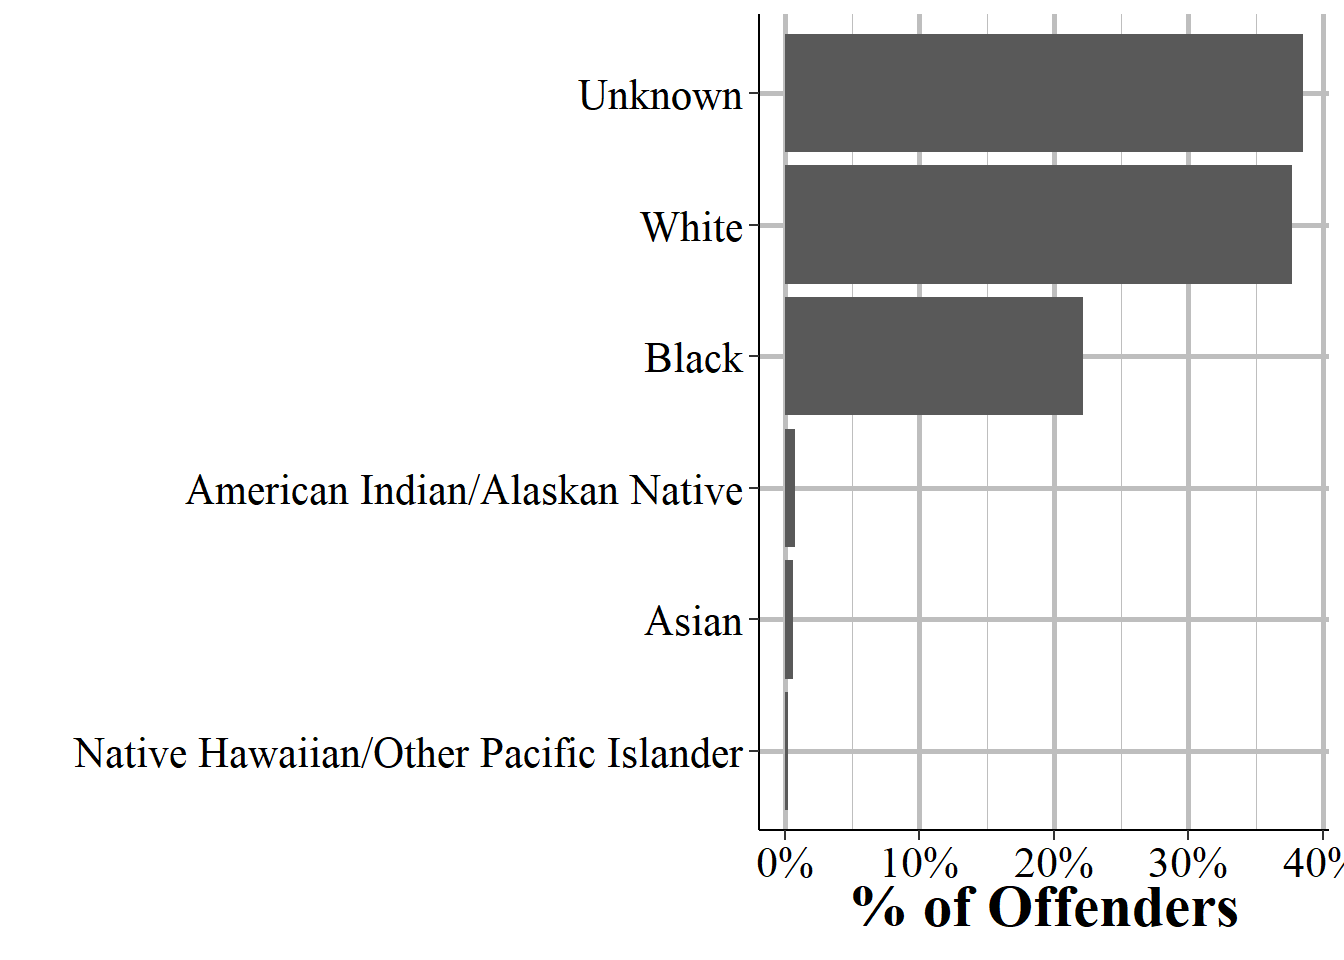 The race of all offenders reported in the 2019 NIBRS data.